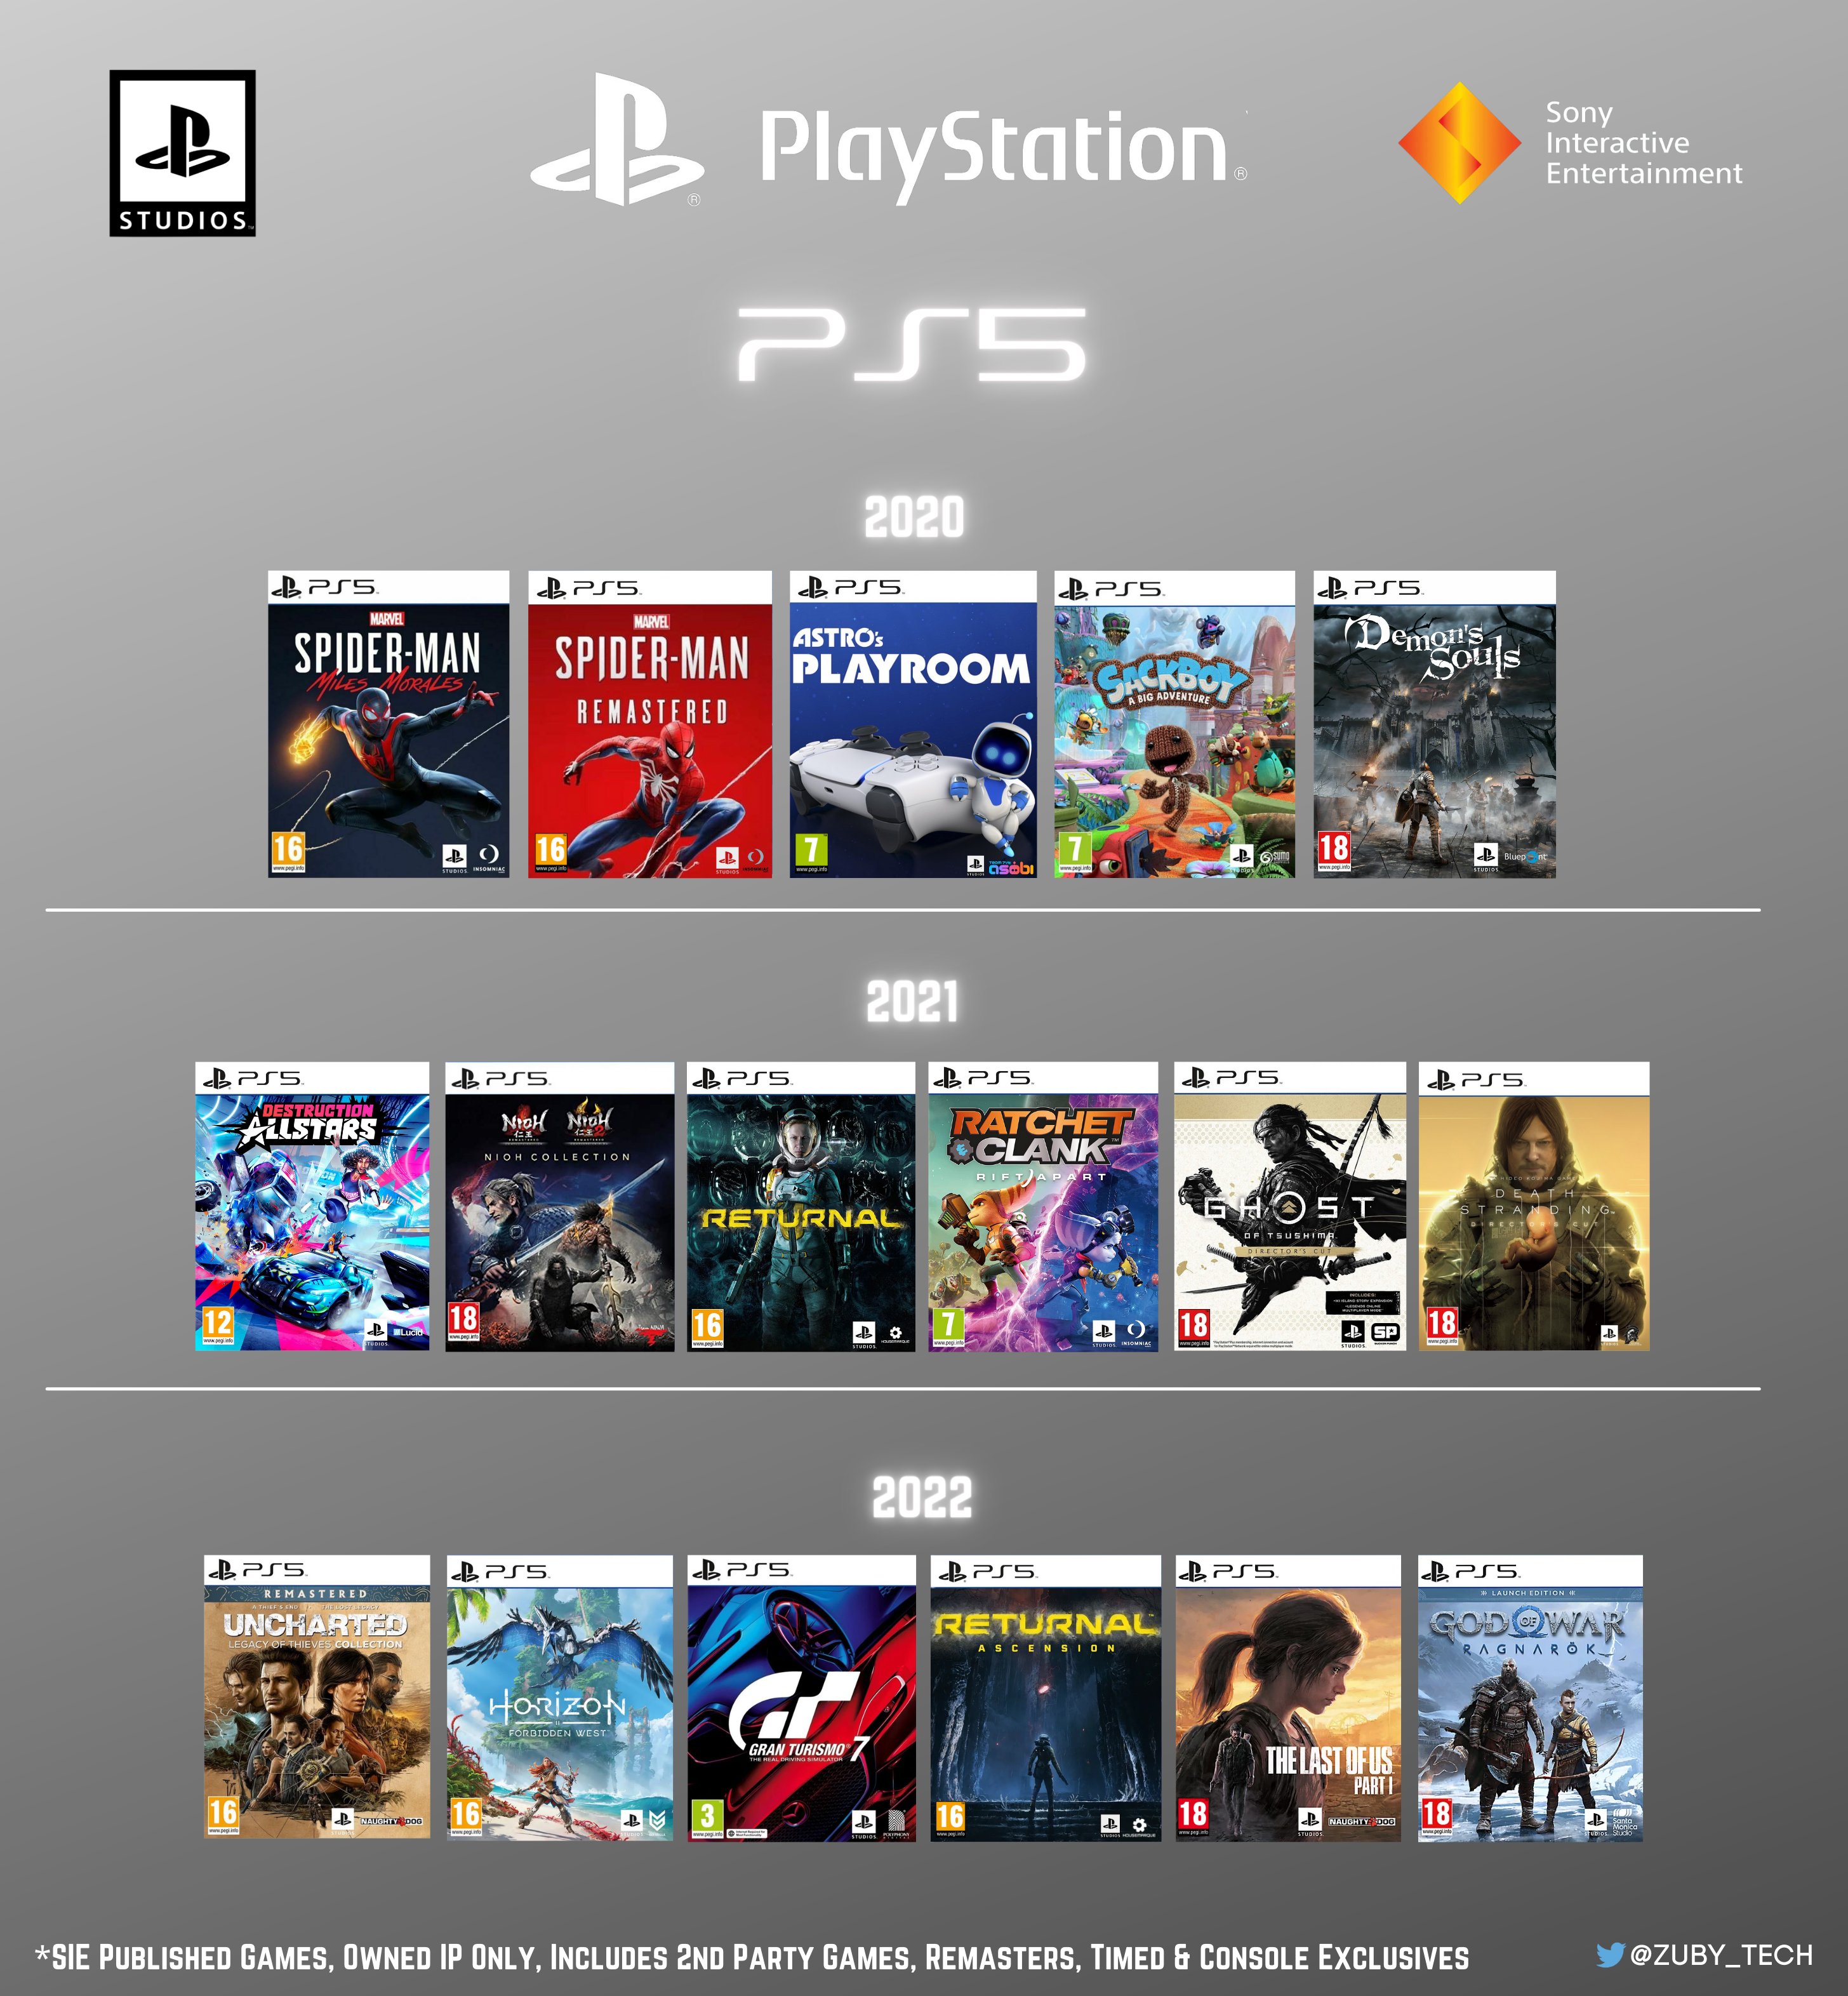 Zuby_Tech on X: "Sony Interactive Entertainment/PlayStation Studios  Freqeuncy, Output & The High Quality Games Is Just Simply Unmatched,  Unrivalled & In A Class Of Their Own! #PlayStation #PlayStationStudios #SIE  https://t.co/m2v6xPyixL" / X